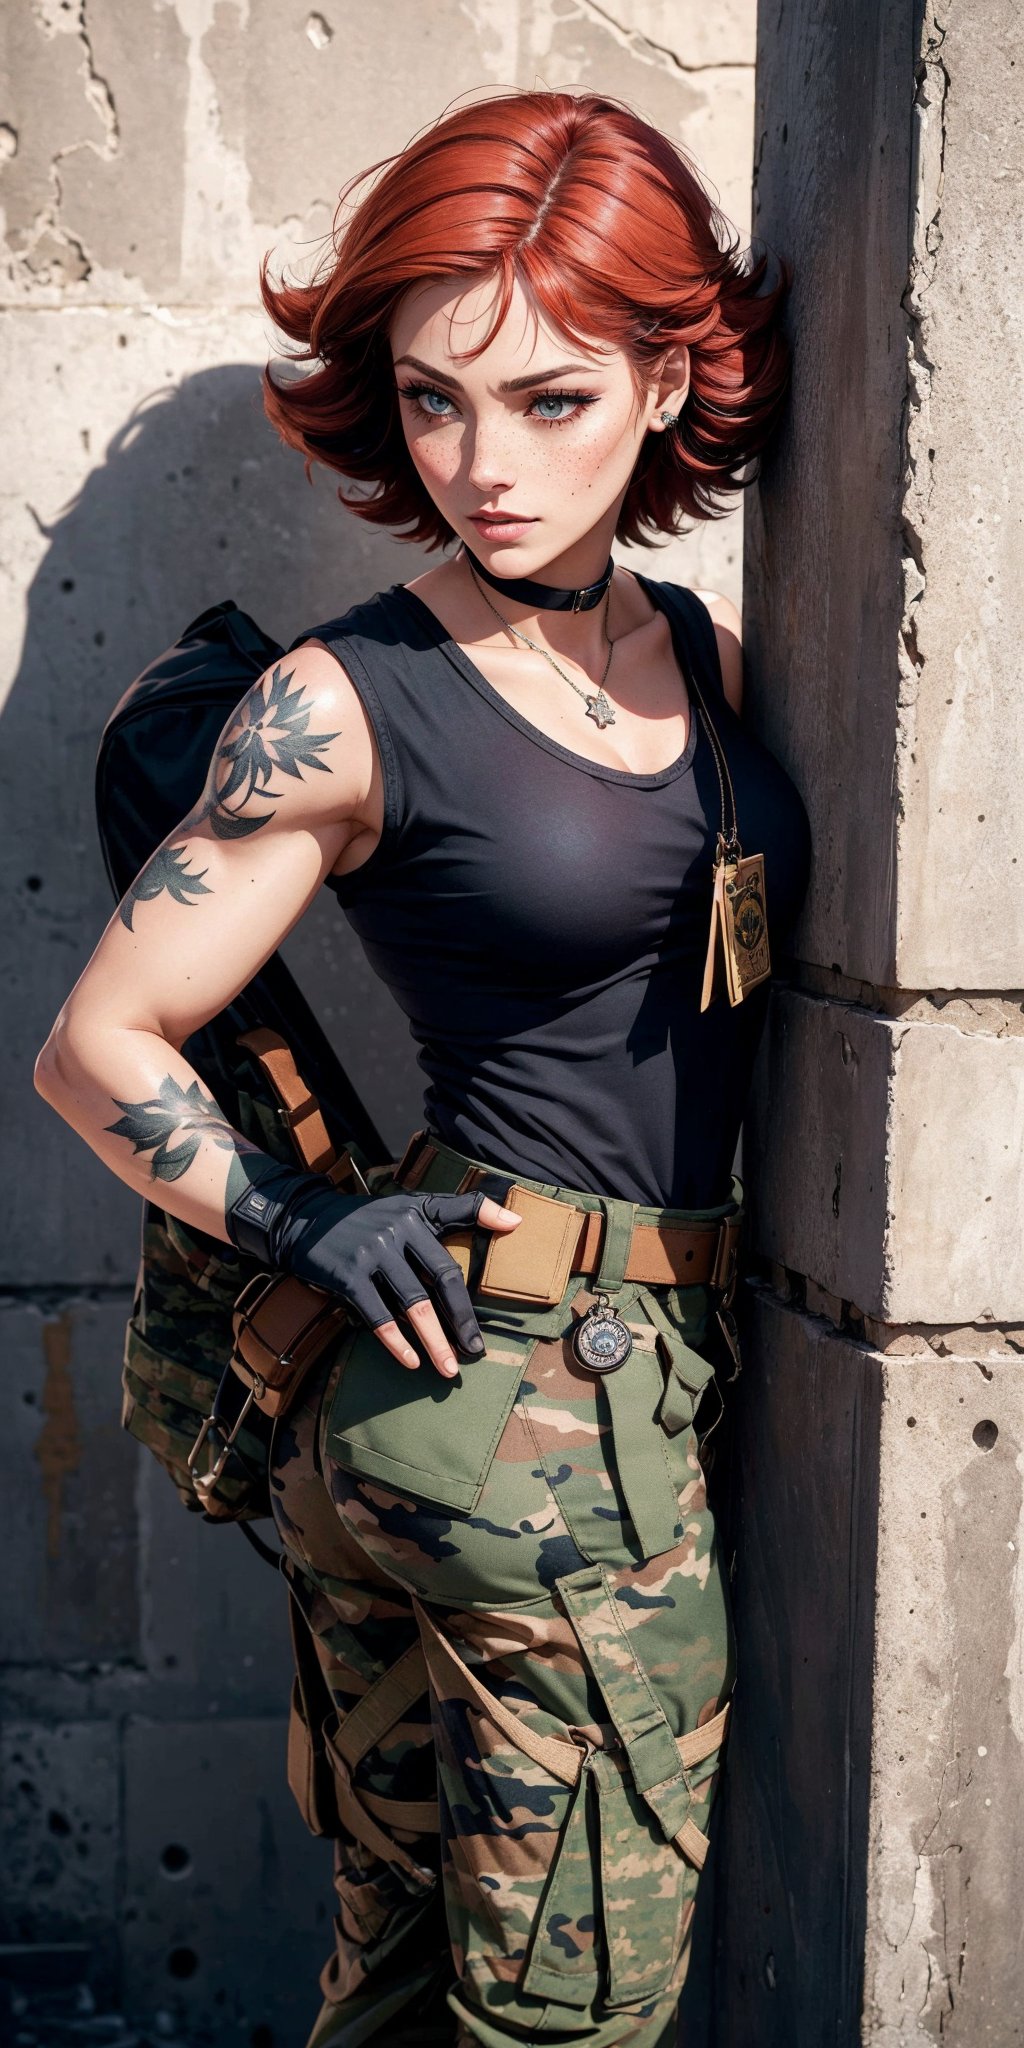 masterpiece,best quality,High quality,meryl, red hair, picture perfect face,blush, freckles,makeup,long eyelashes, perfect female body, black tank top,belt, camouflage pants, fingerless gloves,
military arm tattoo, dogtag,
military base, 